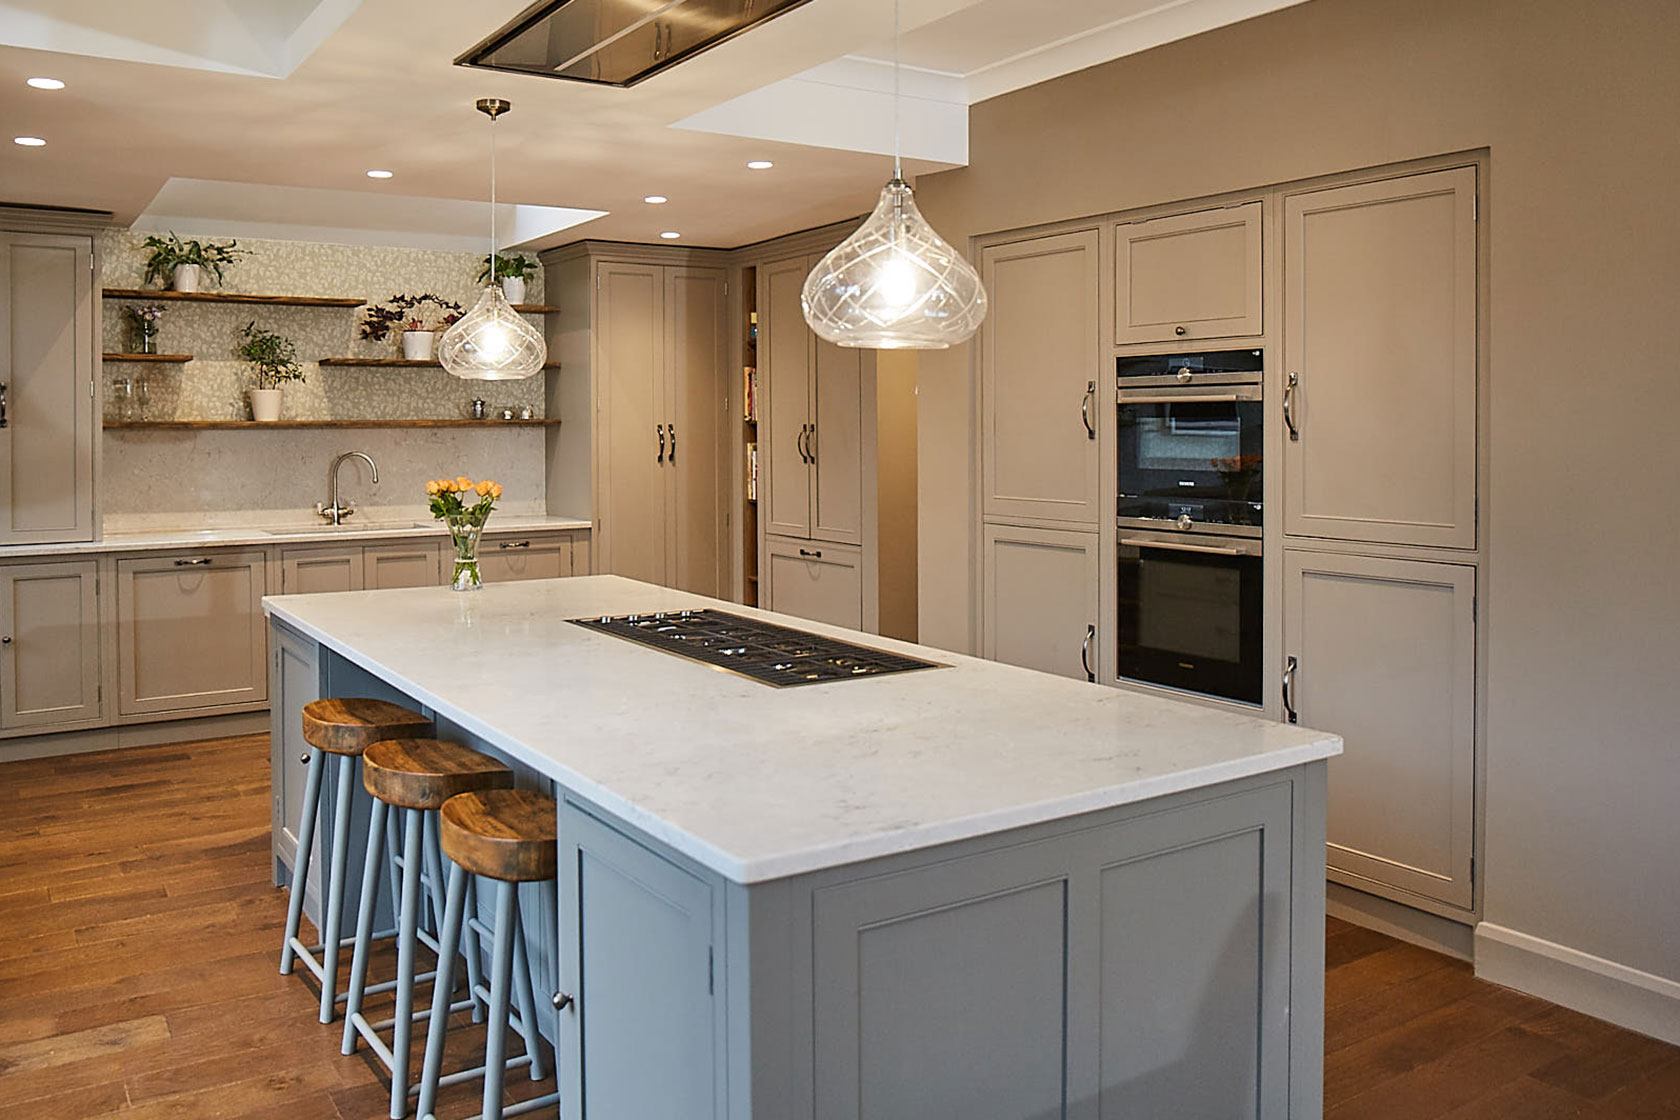 Crystal pendant lights above traditional painted kitchen island with white quartz worktop